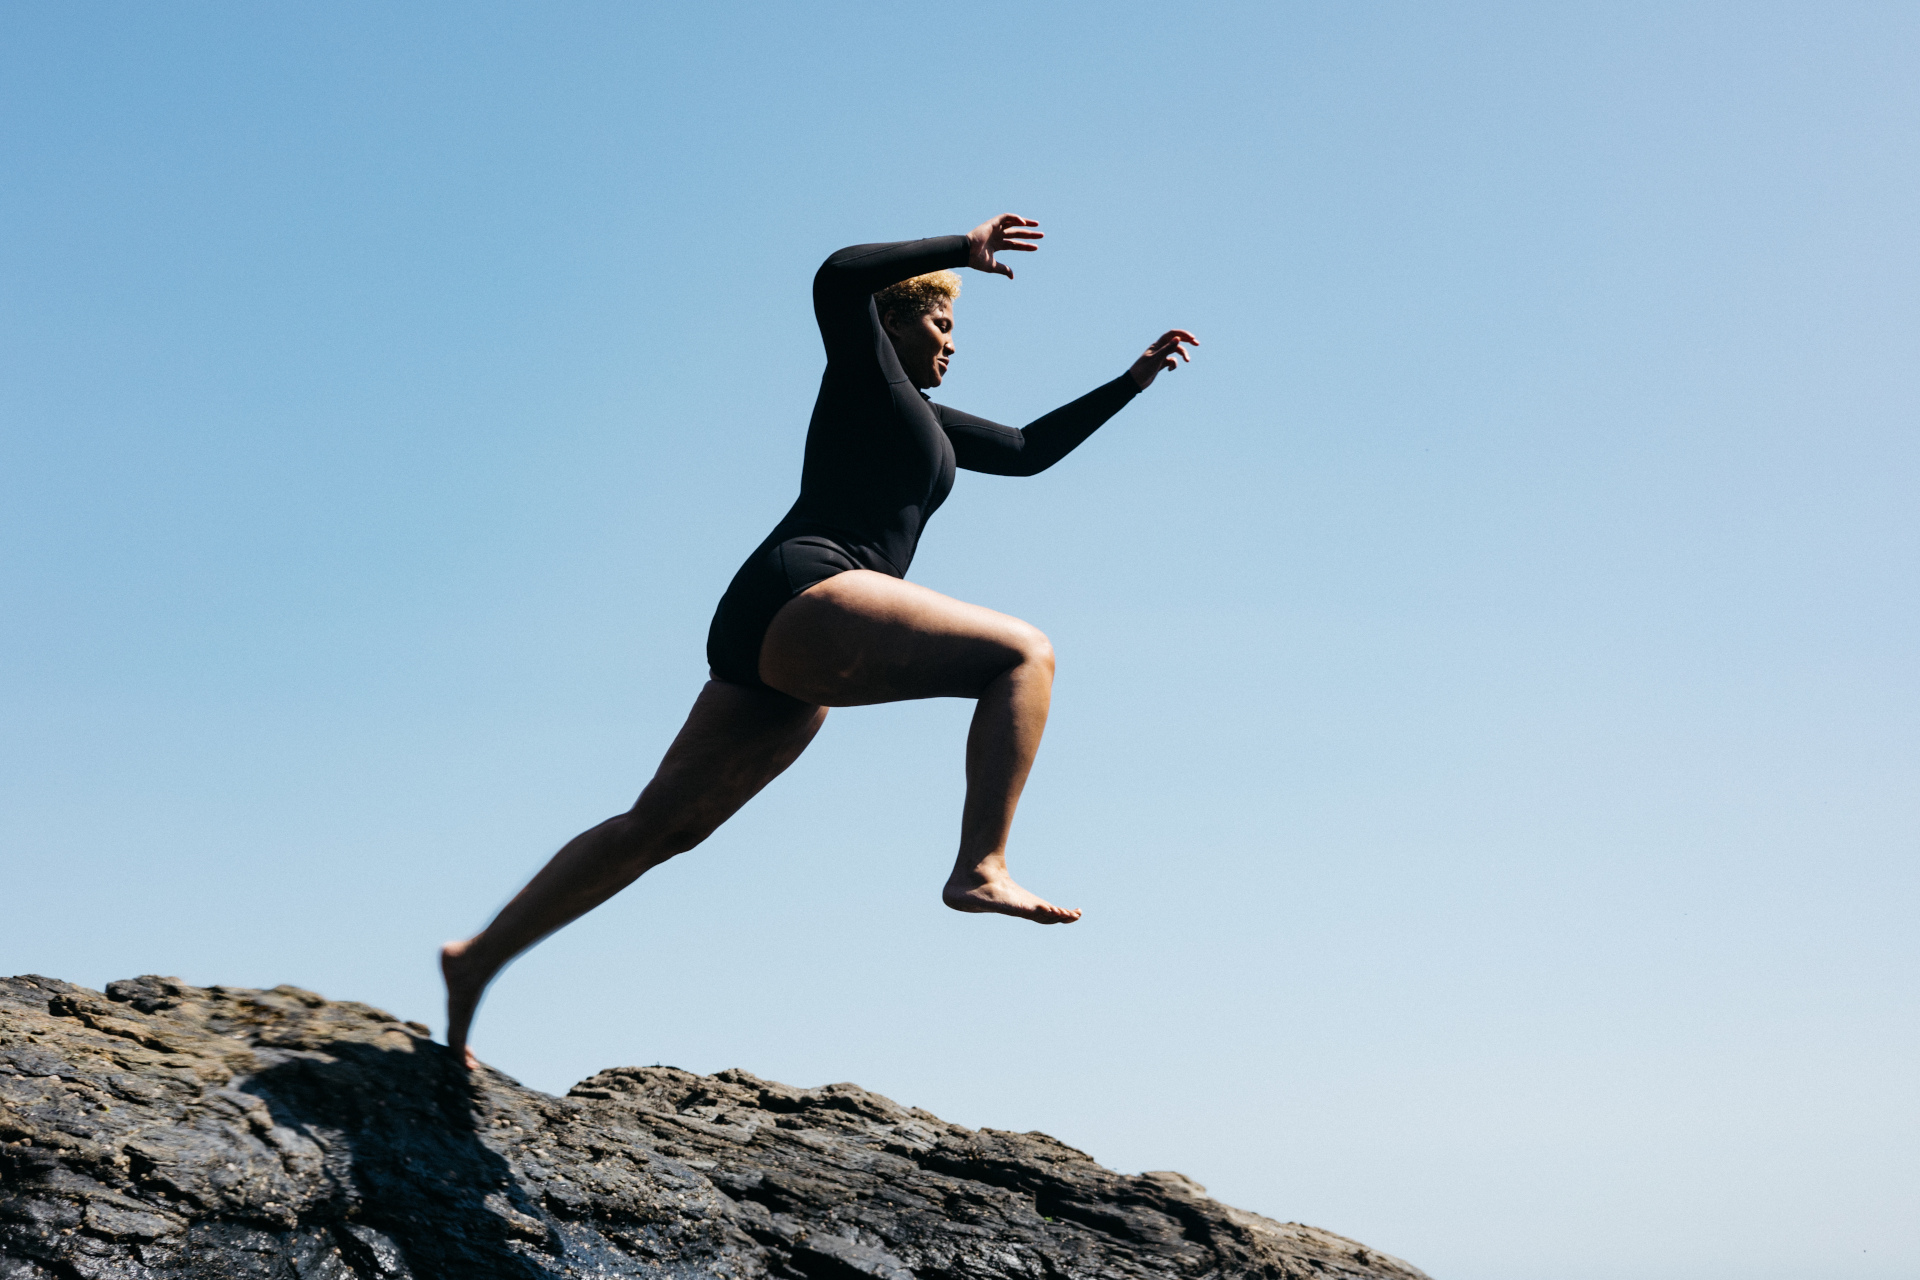 Woman jumping from rocks in wetsuit